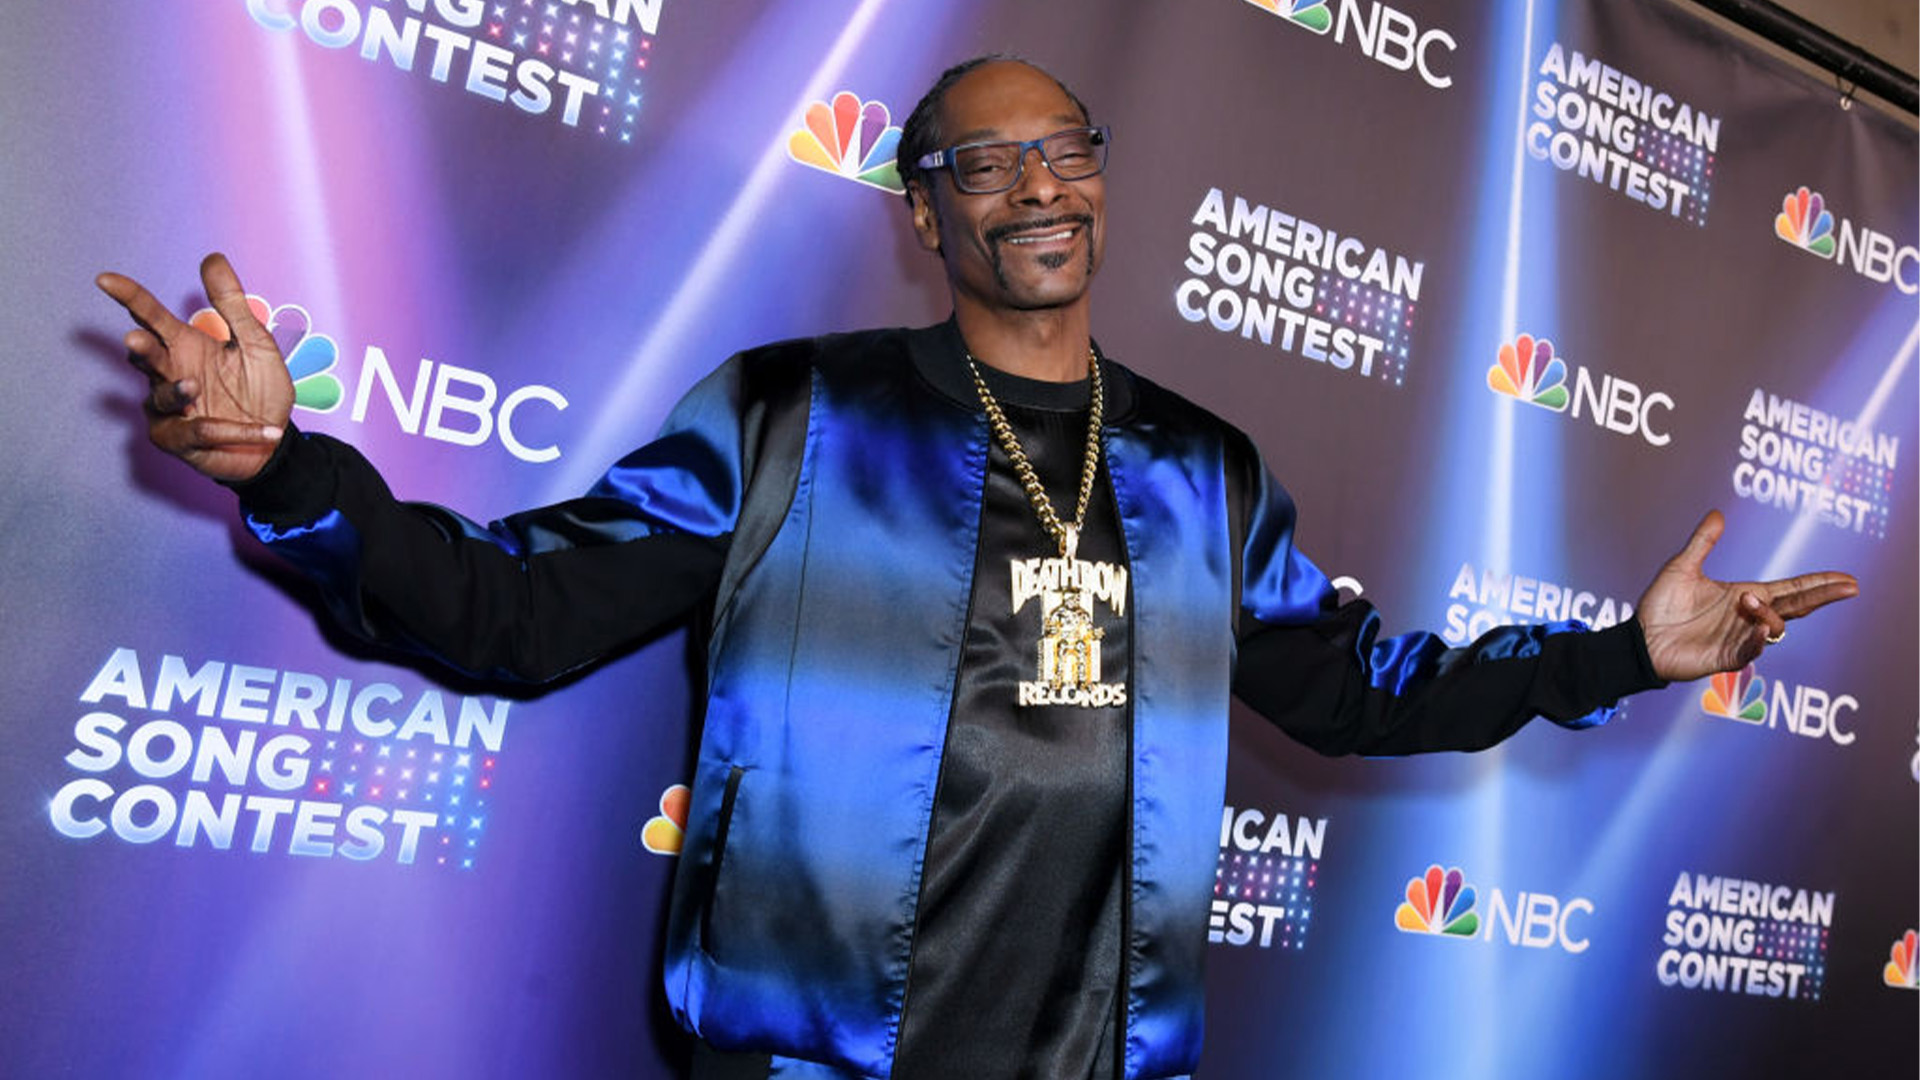 From A Restaurant With Gordon Ramsay To Virtual Cannabis, Snoop Dogg Has Business Moves That Prove He's More Than Music